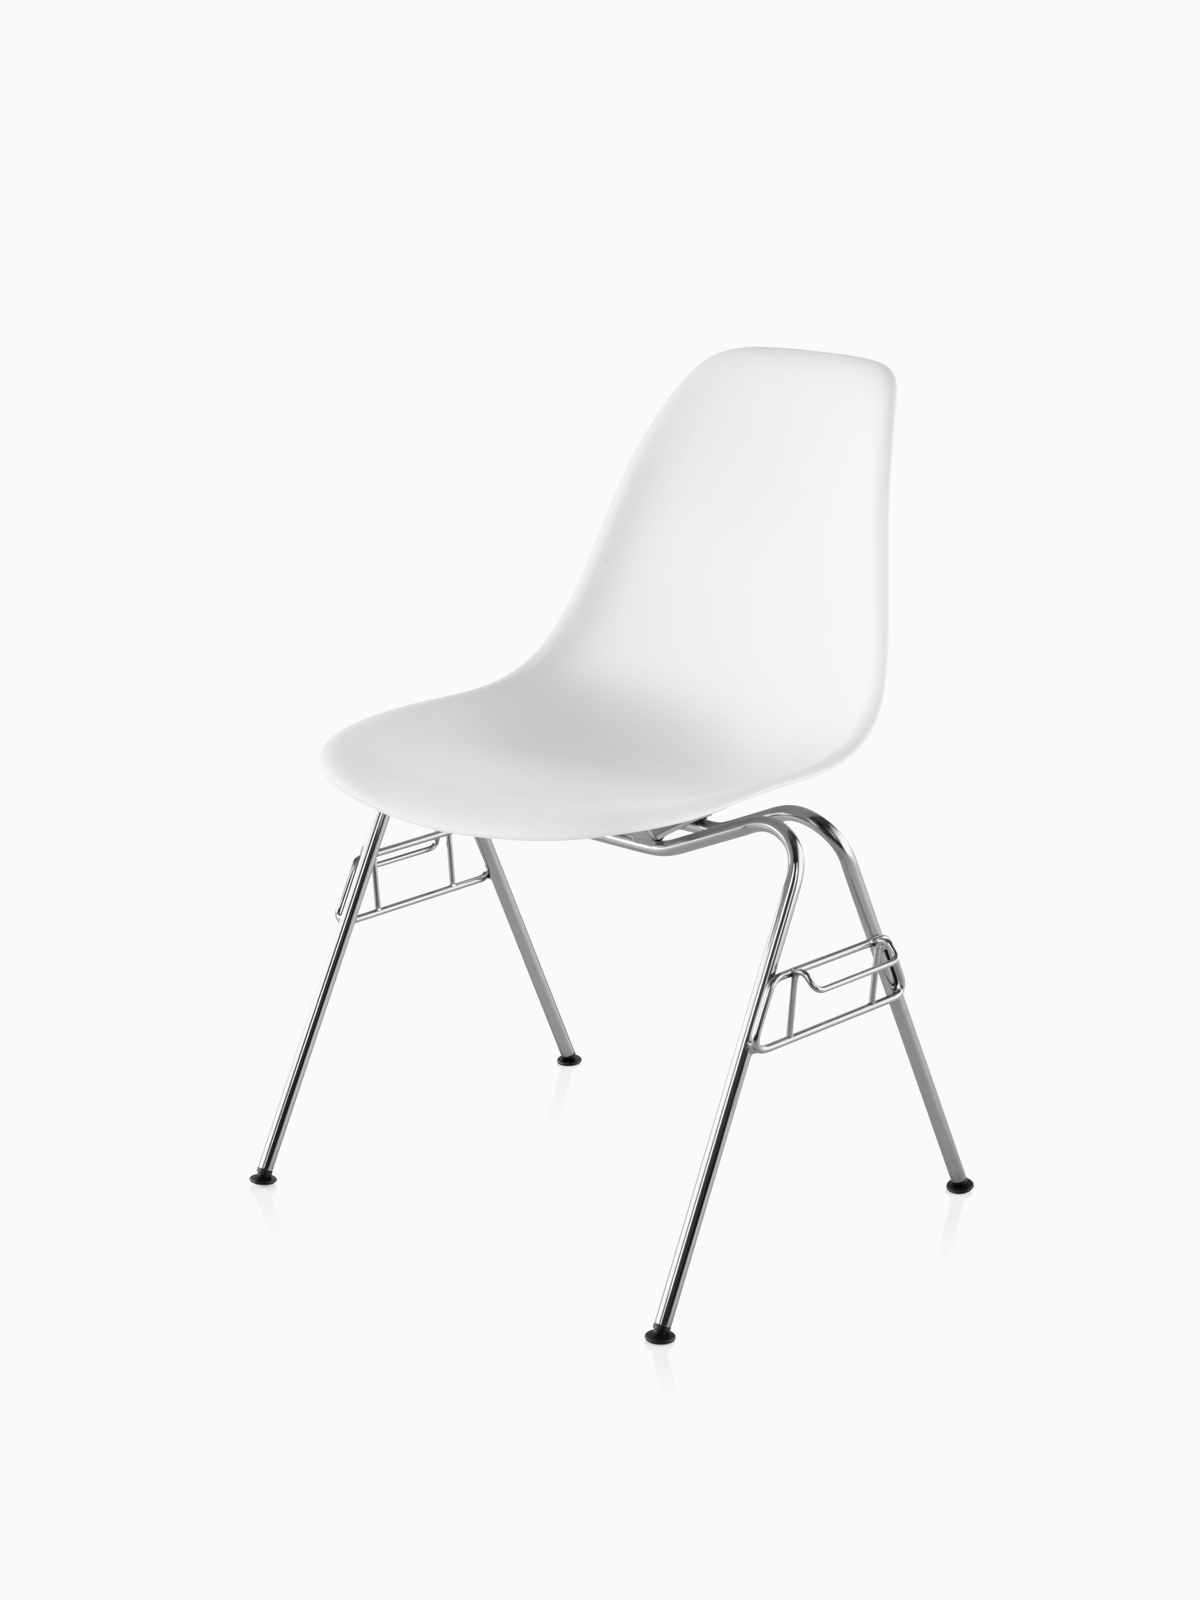 Eames Molded Plastic Chairs